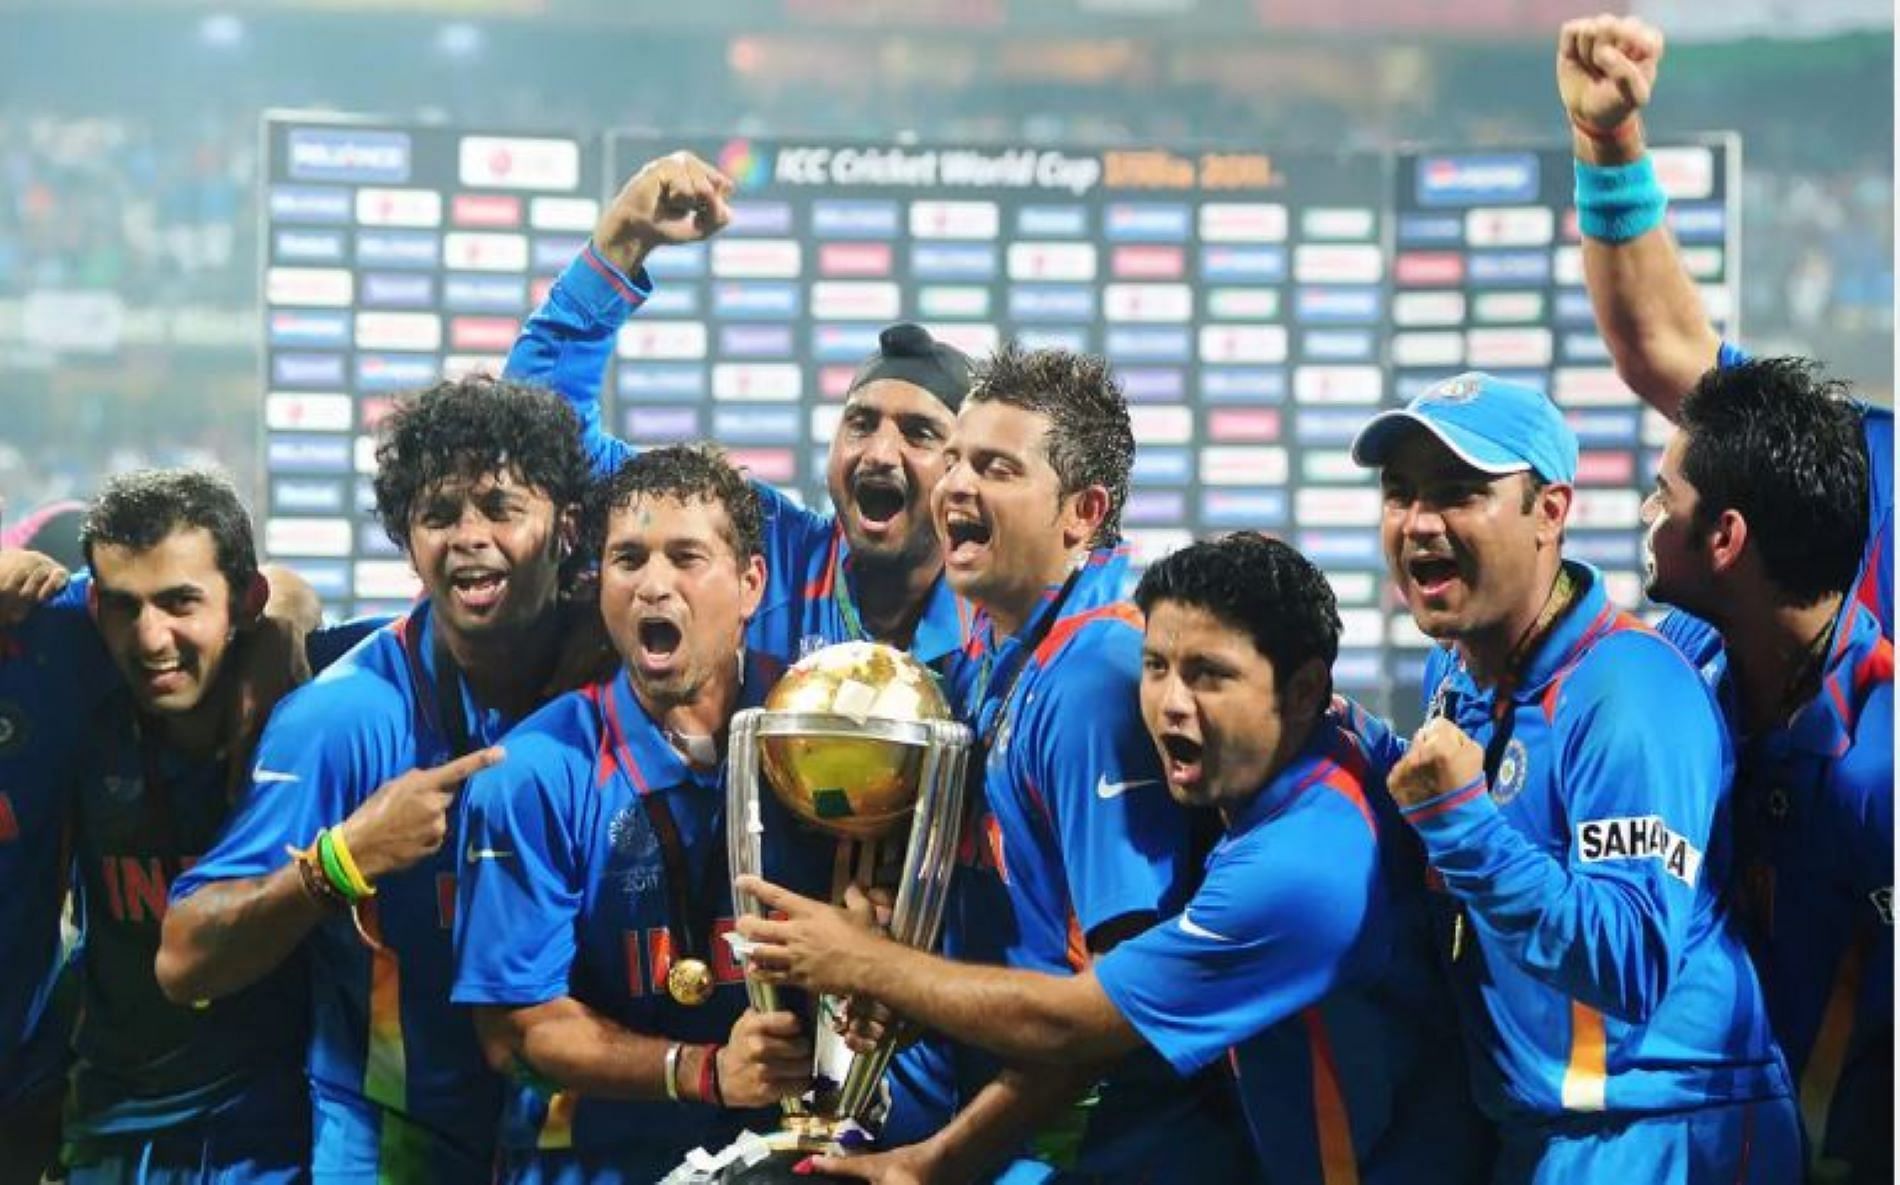 Team India overcame immense pressure to be crowned as World Champions.